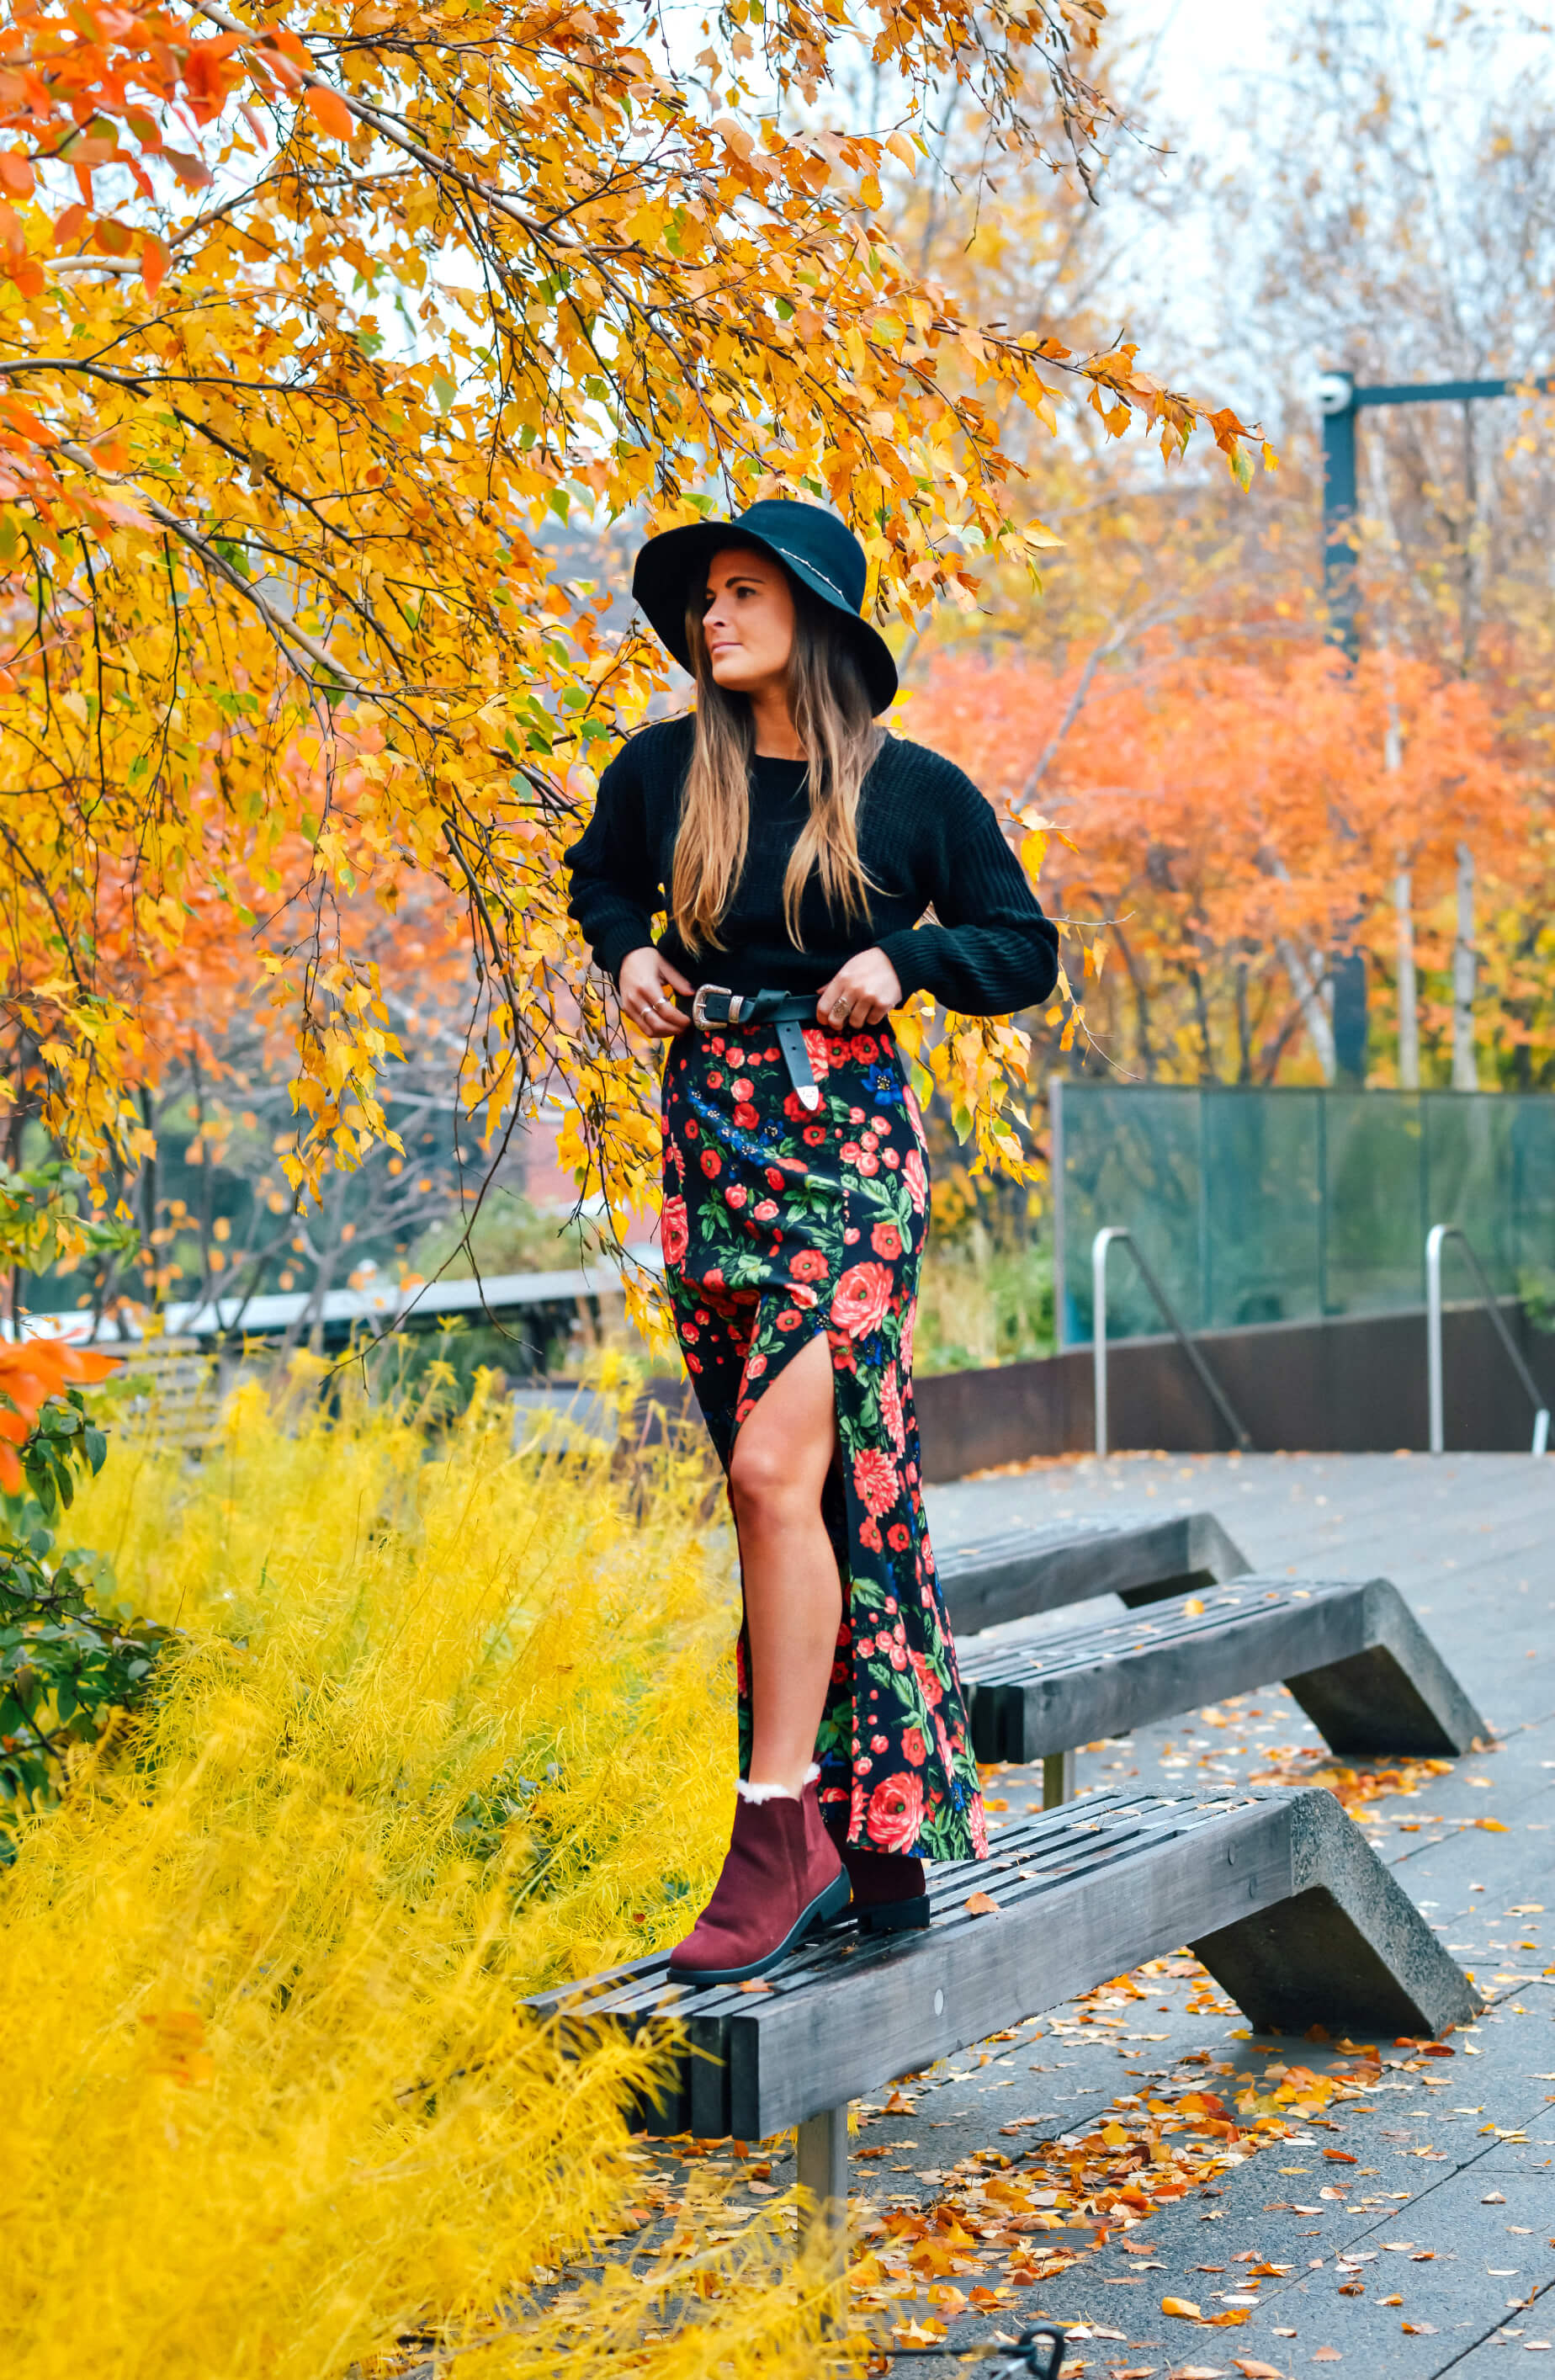 EMU Travels The World: NYC, EMU Australia Pioneer Boot in Red Wine, Fall Style, New York City High Line, Fall Outfit, Tilden of To Be Bright